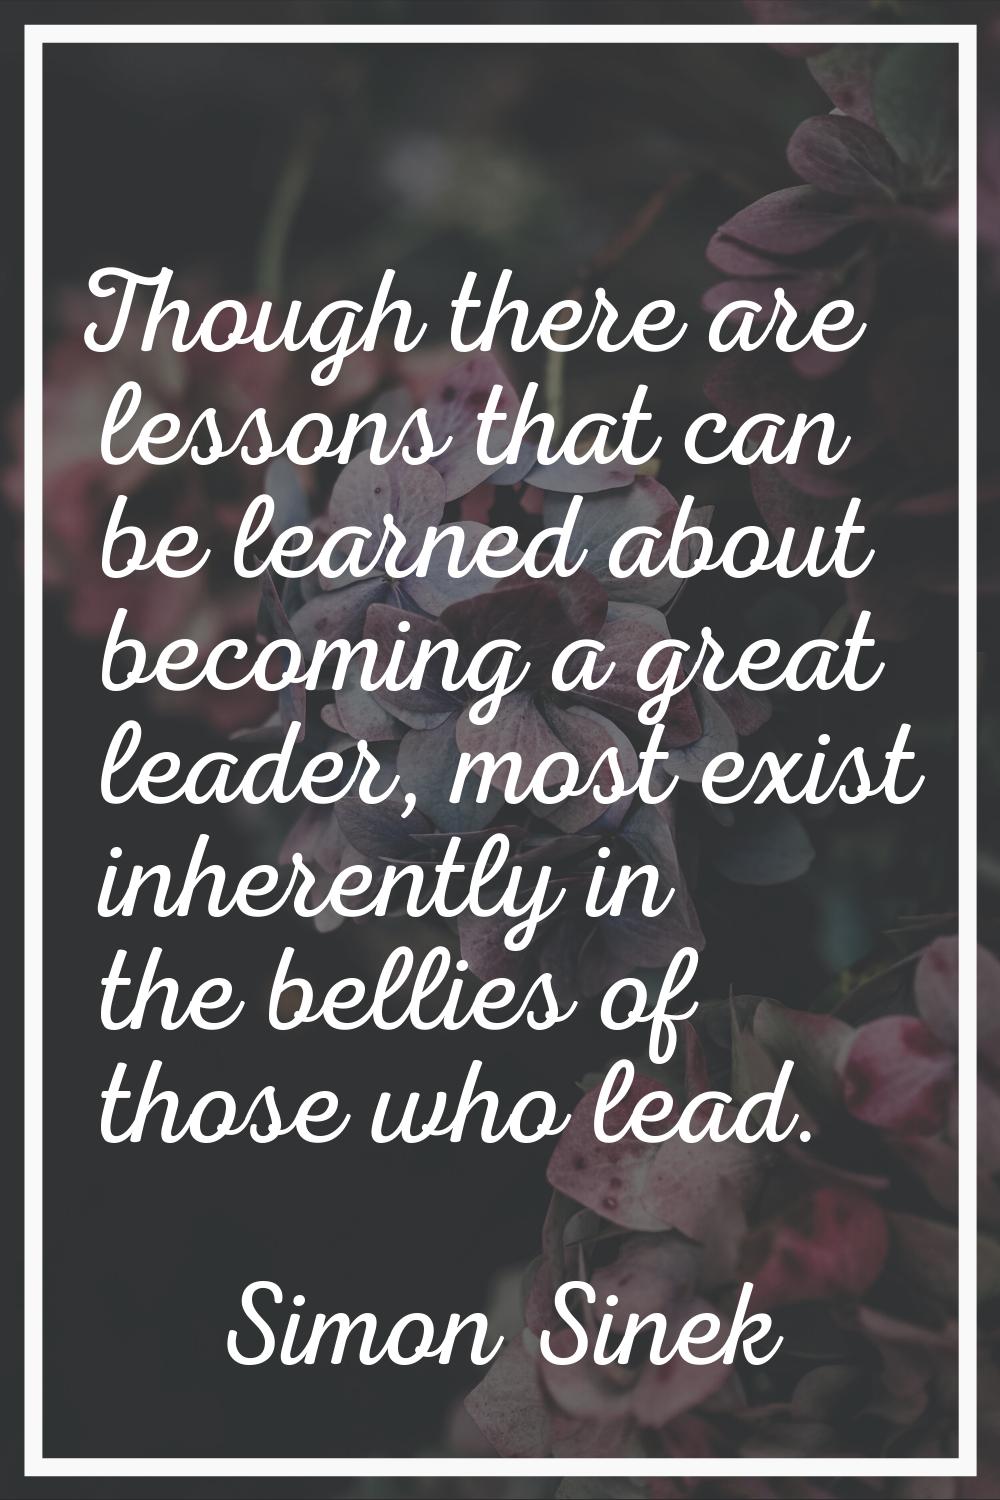 Though there are lessons that can be learned about becoming a great leader, most exist inherently i